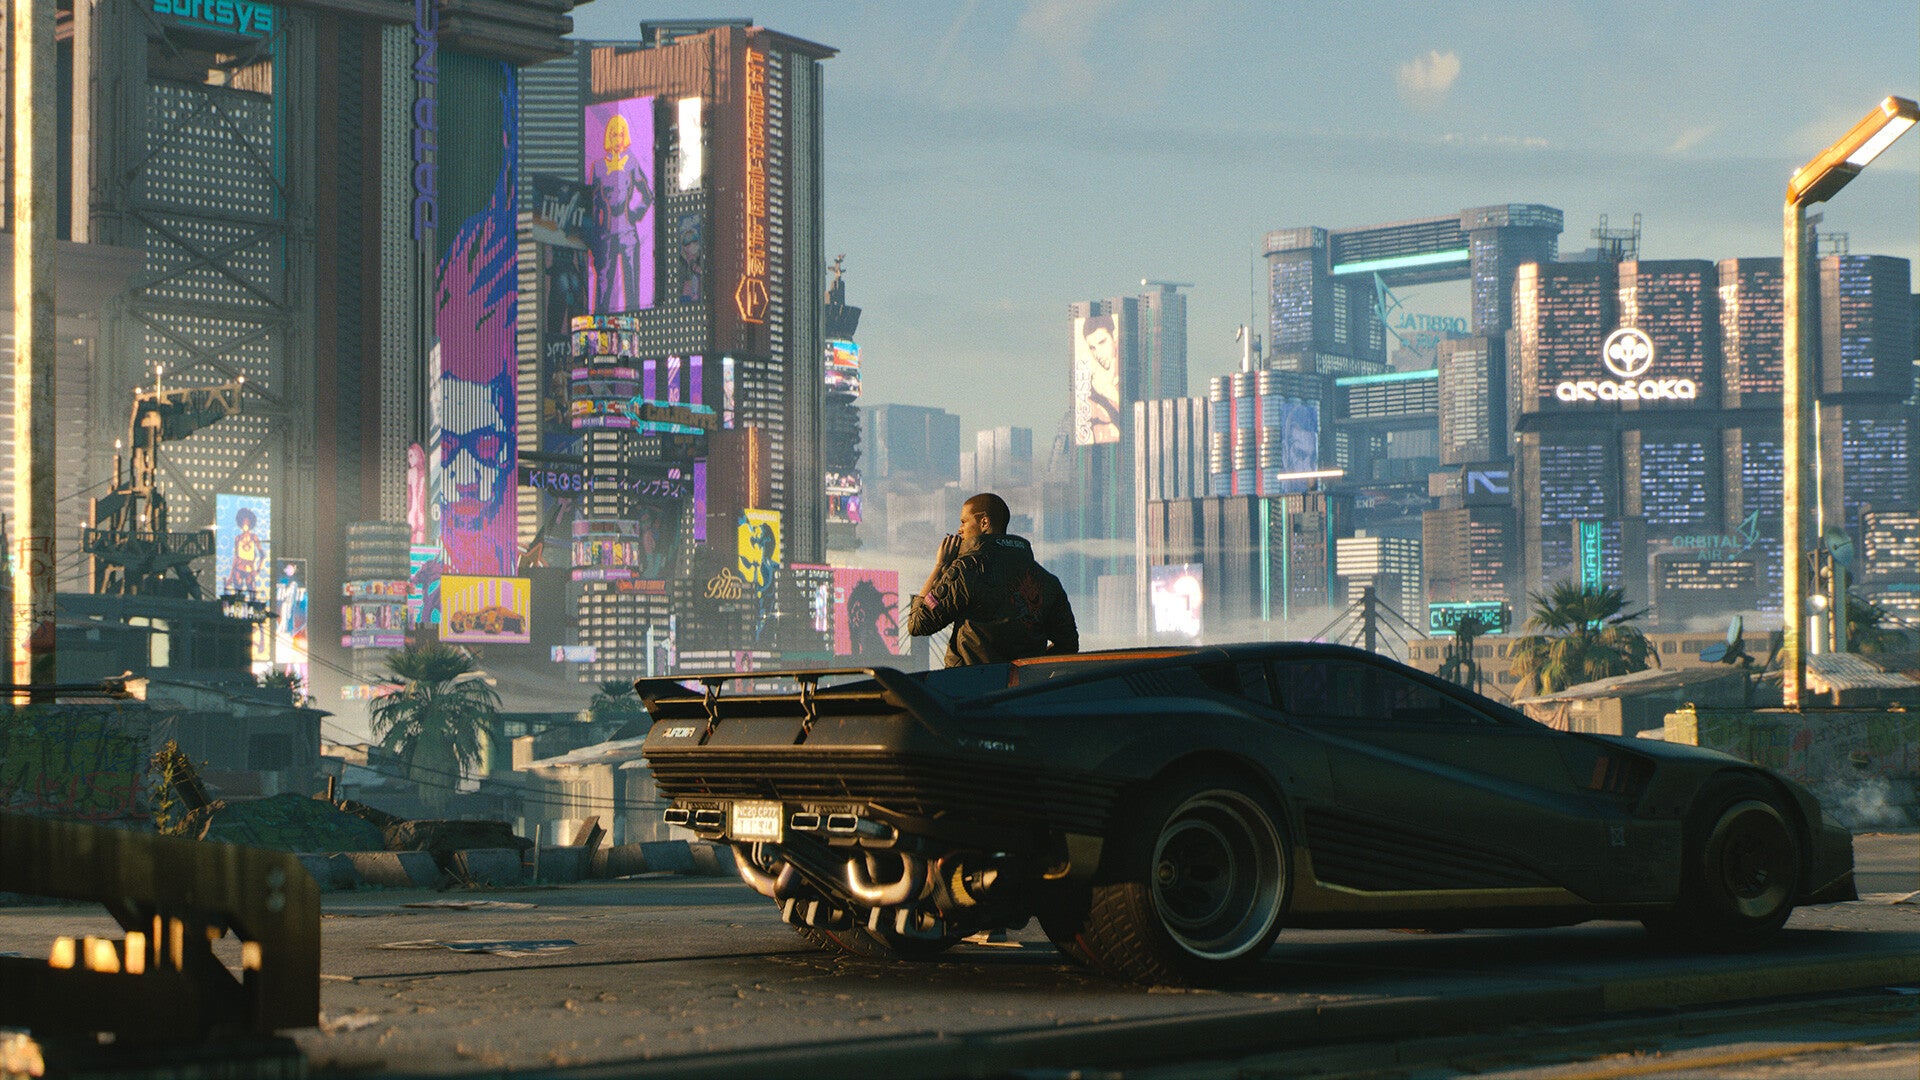 V stands outside his car smoking a cigarette on the street in Cyberpunk 2077.